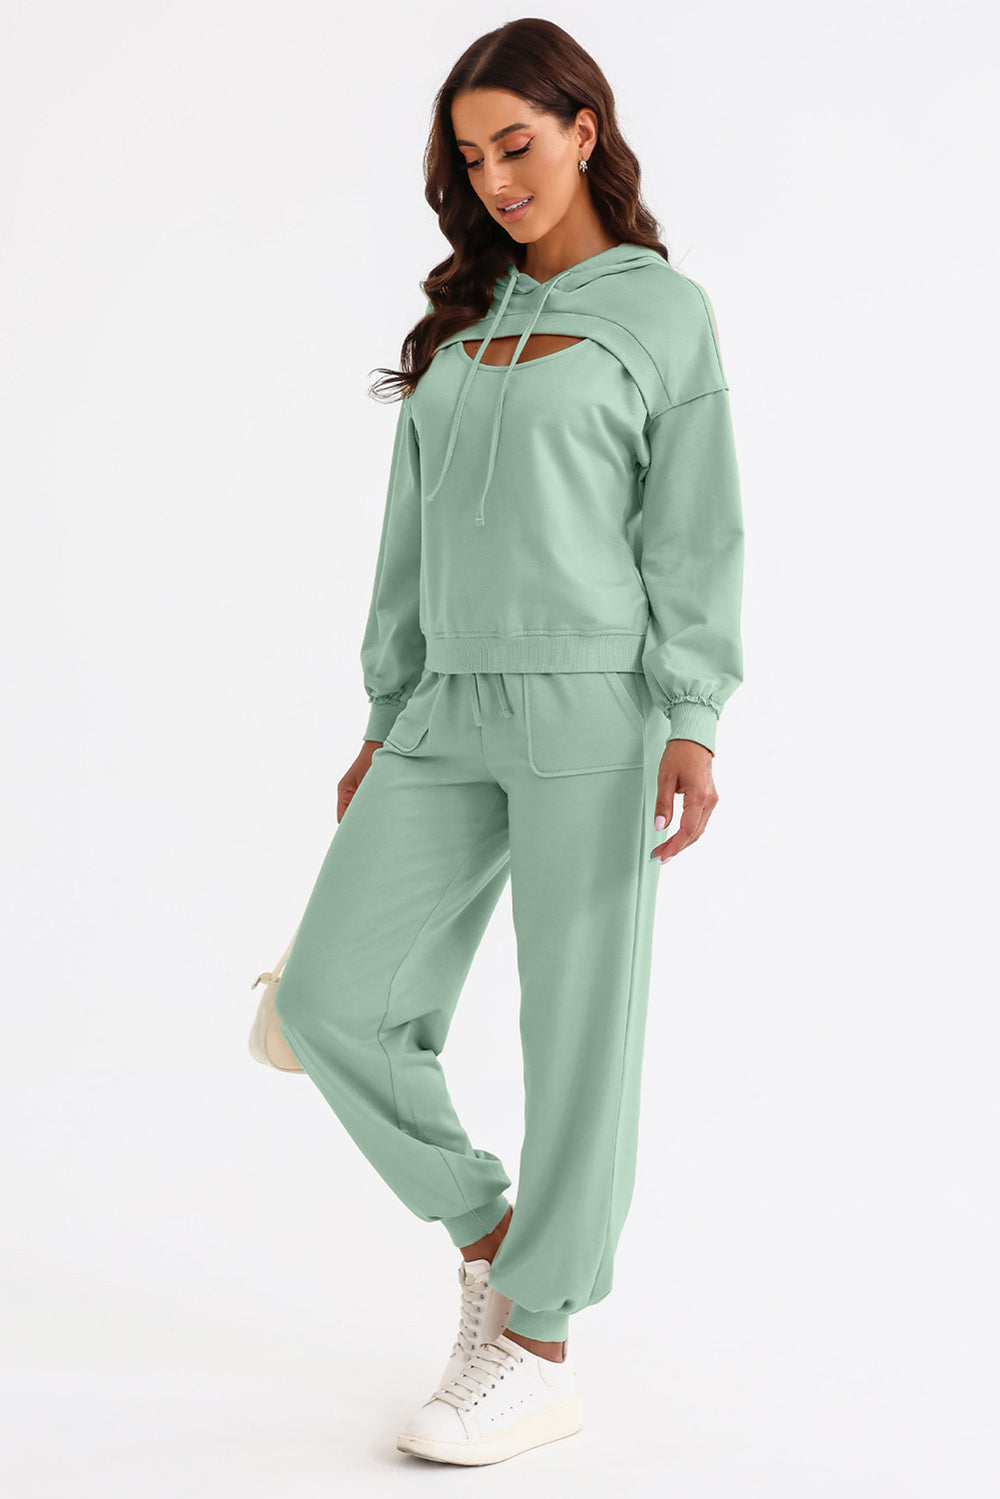 Get trendy with Cutout Drawstring Hoodie and Joggers Active Set - Activewear available at Styles Code. Grab yours today!